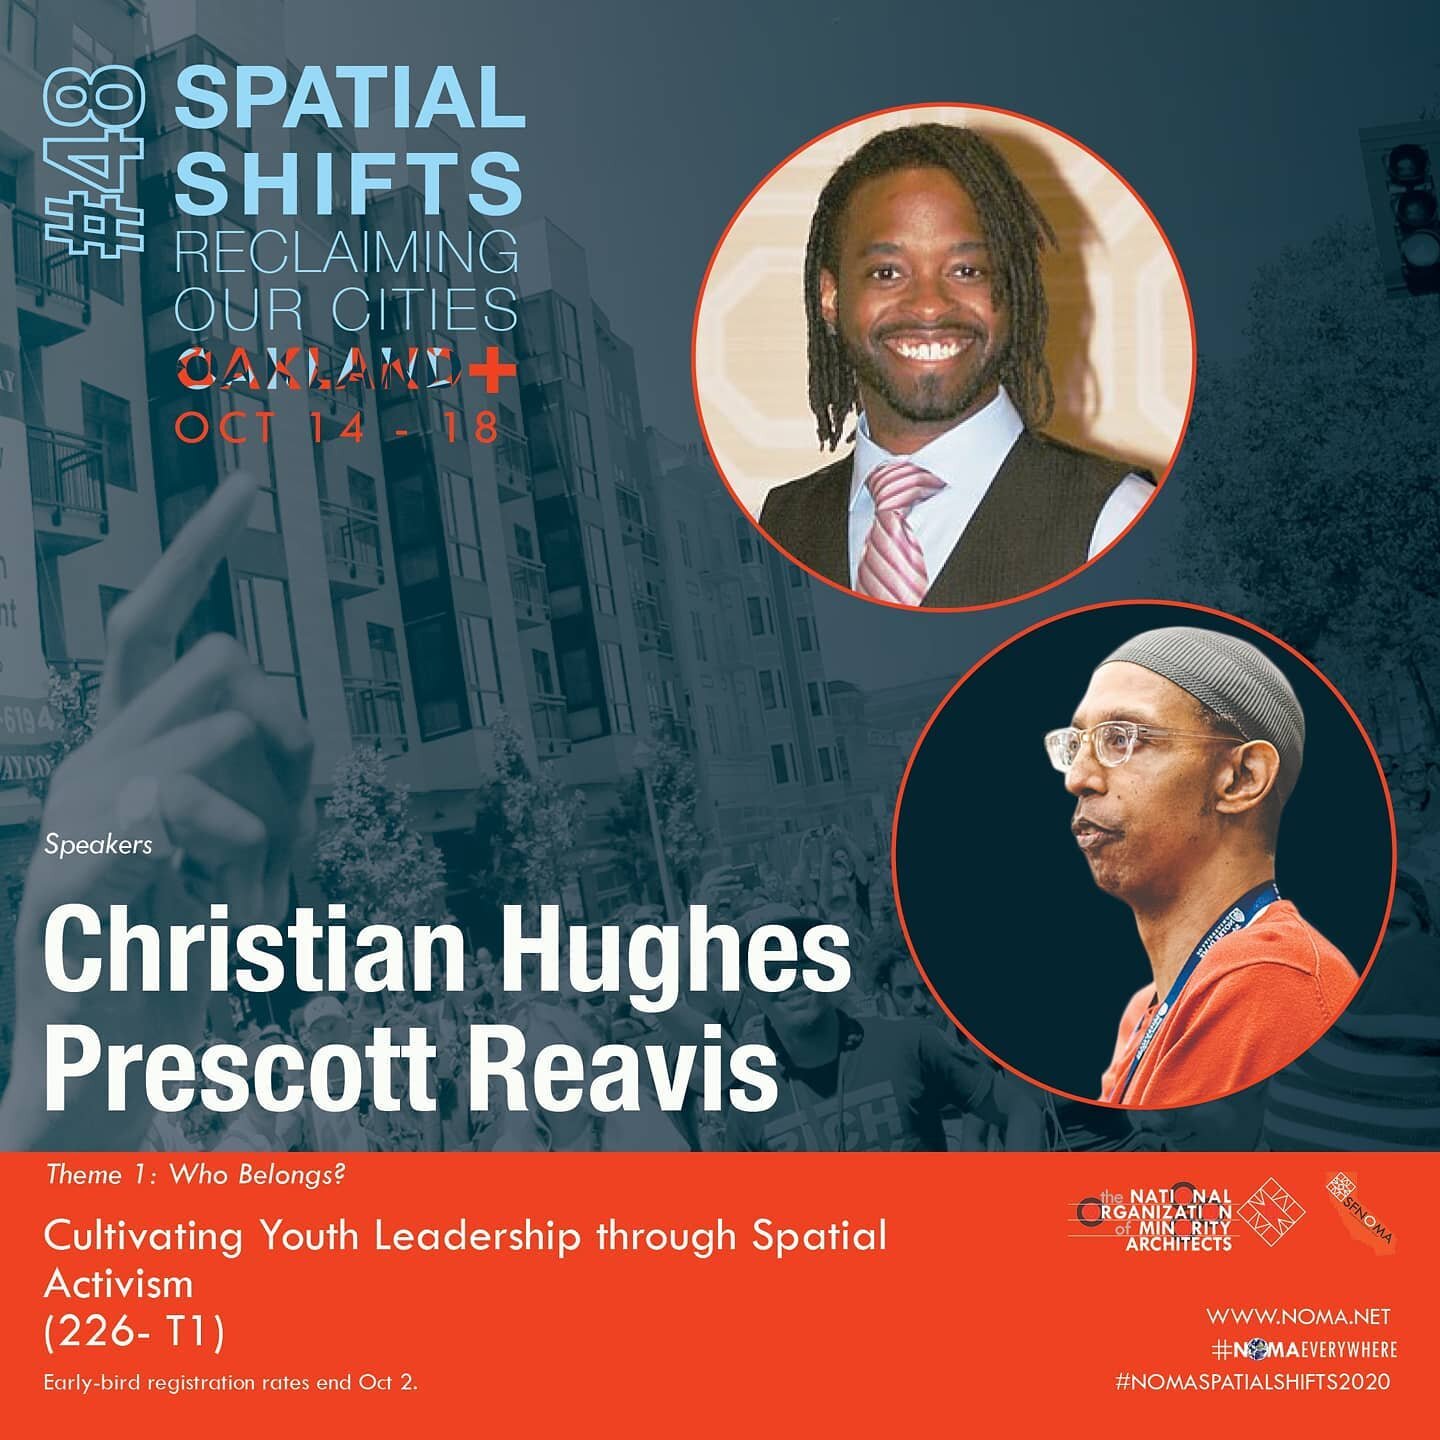 Today, alongside Brother Prescott Reavis @skibison, our founder @thearchitectscale will be presenting for the 48th NOMA National Conference (National Organization of Minority Architects) about our work in youth inclusion in community design and youth